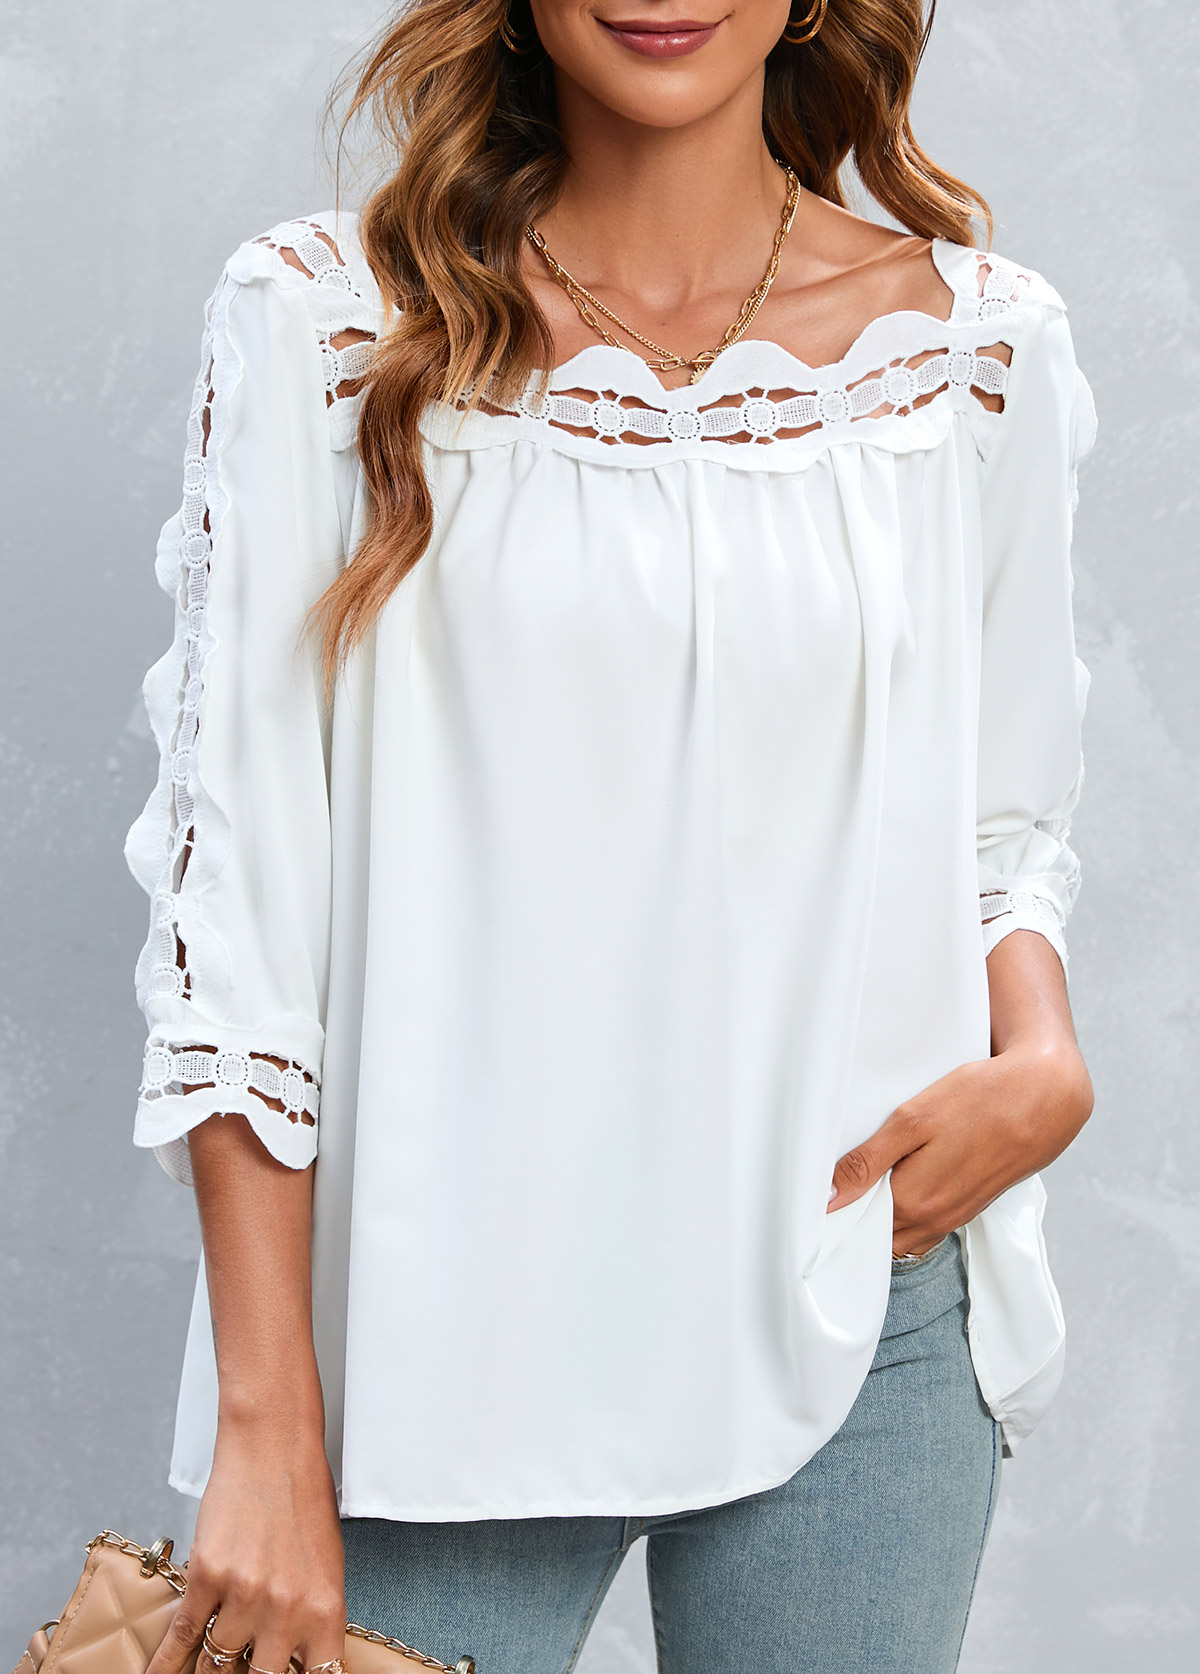 Patchwork White 3/4 Sleeve Square Neck Blouse